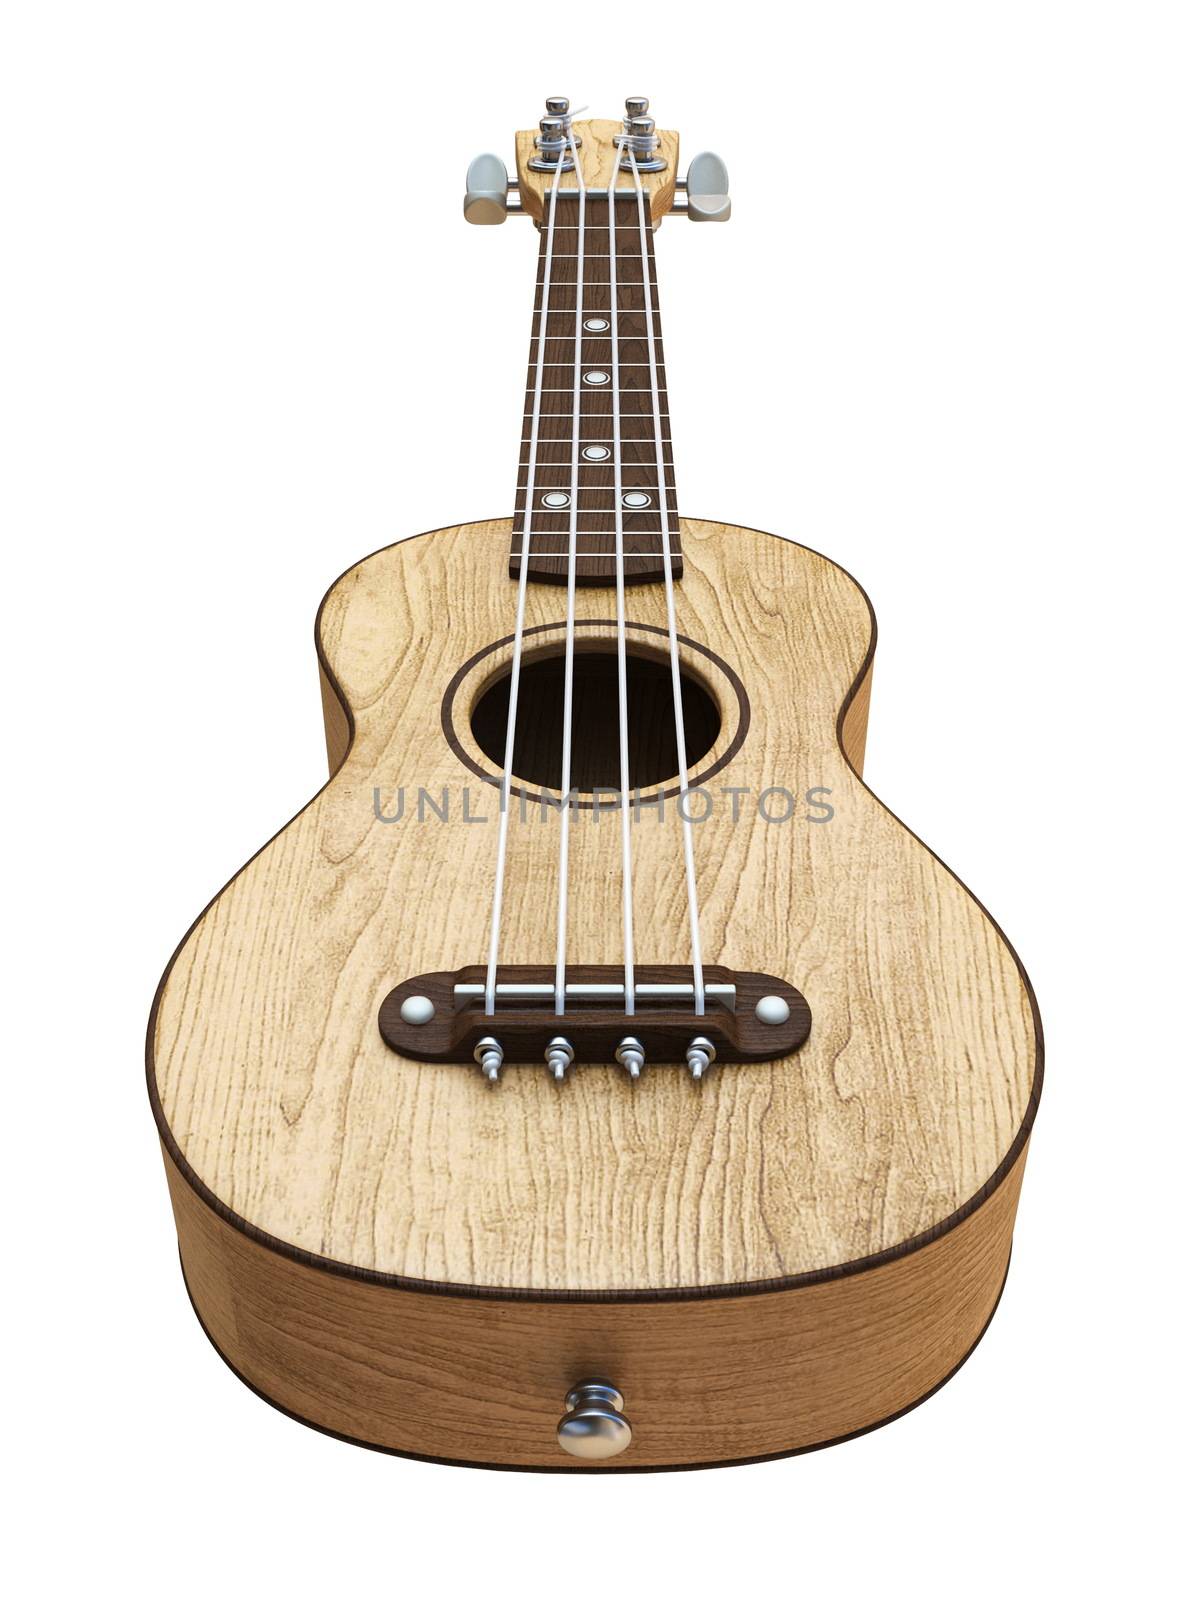 Wooden traditional soprano ukulele Right view 3D render illustration isolated on white background